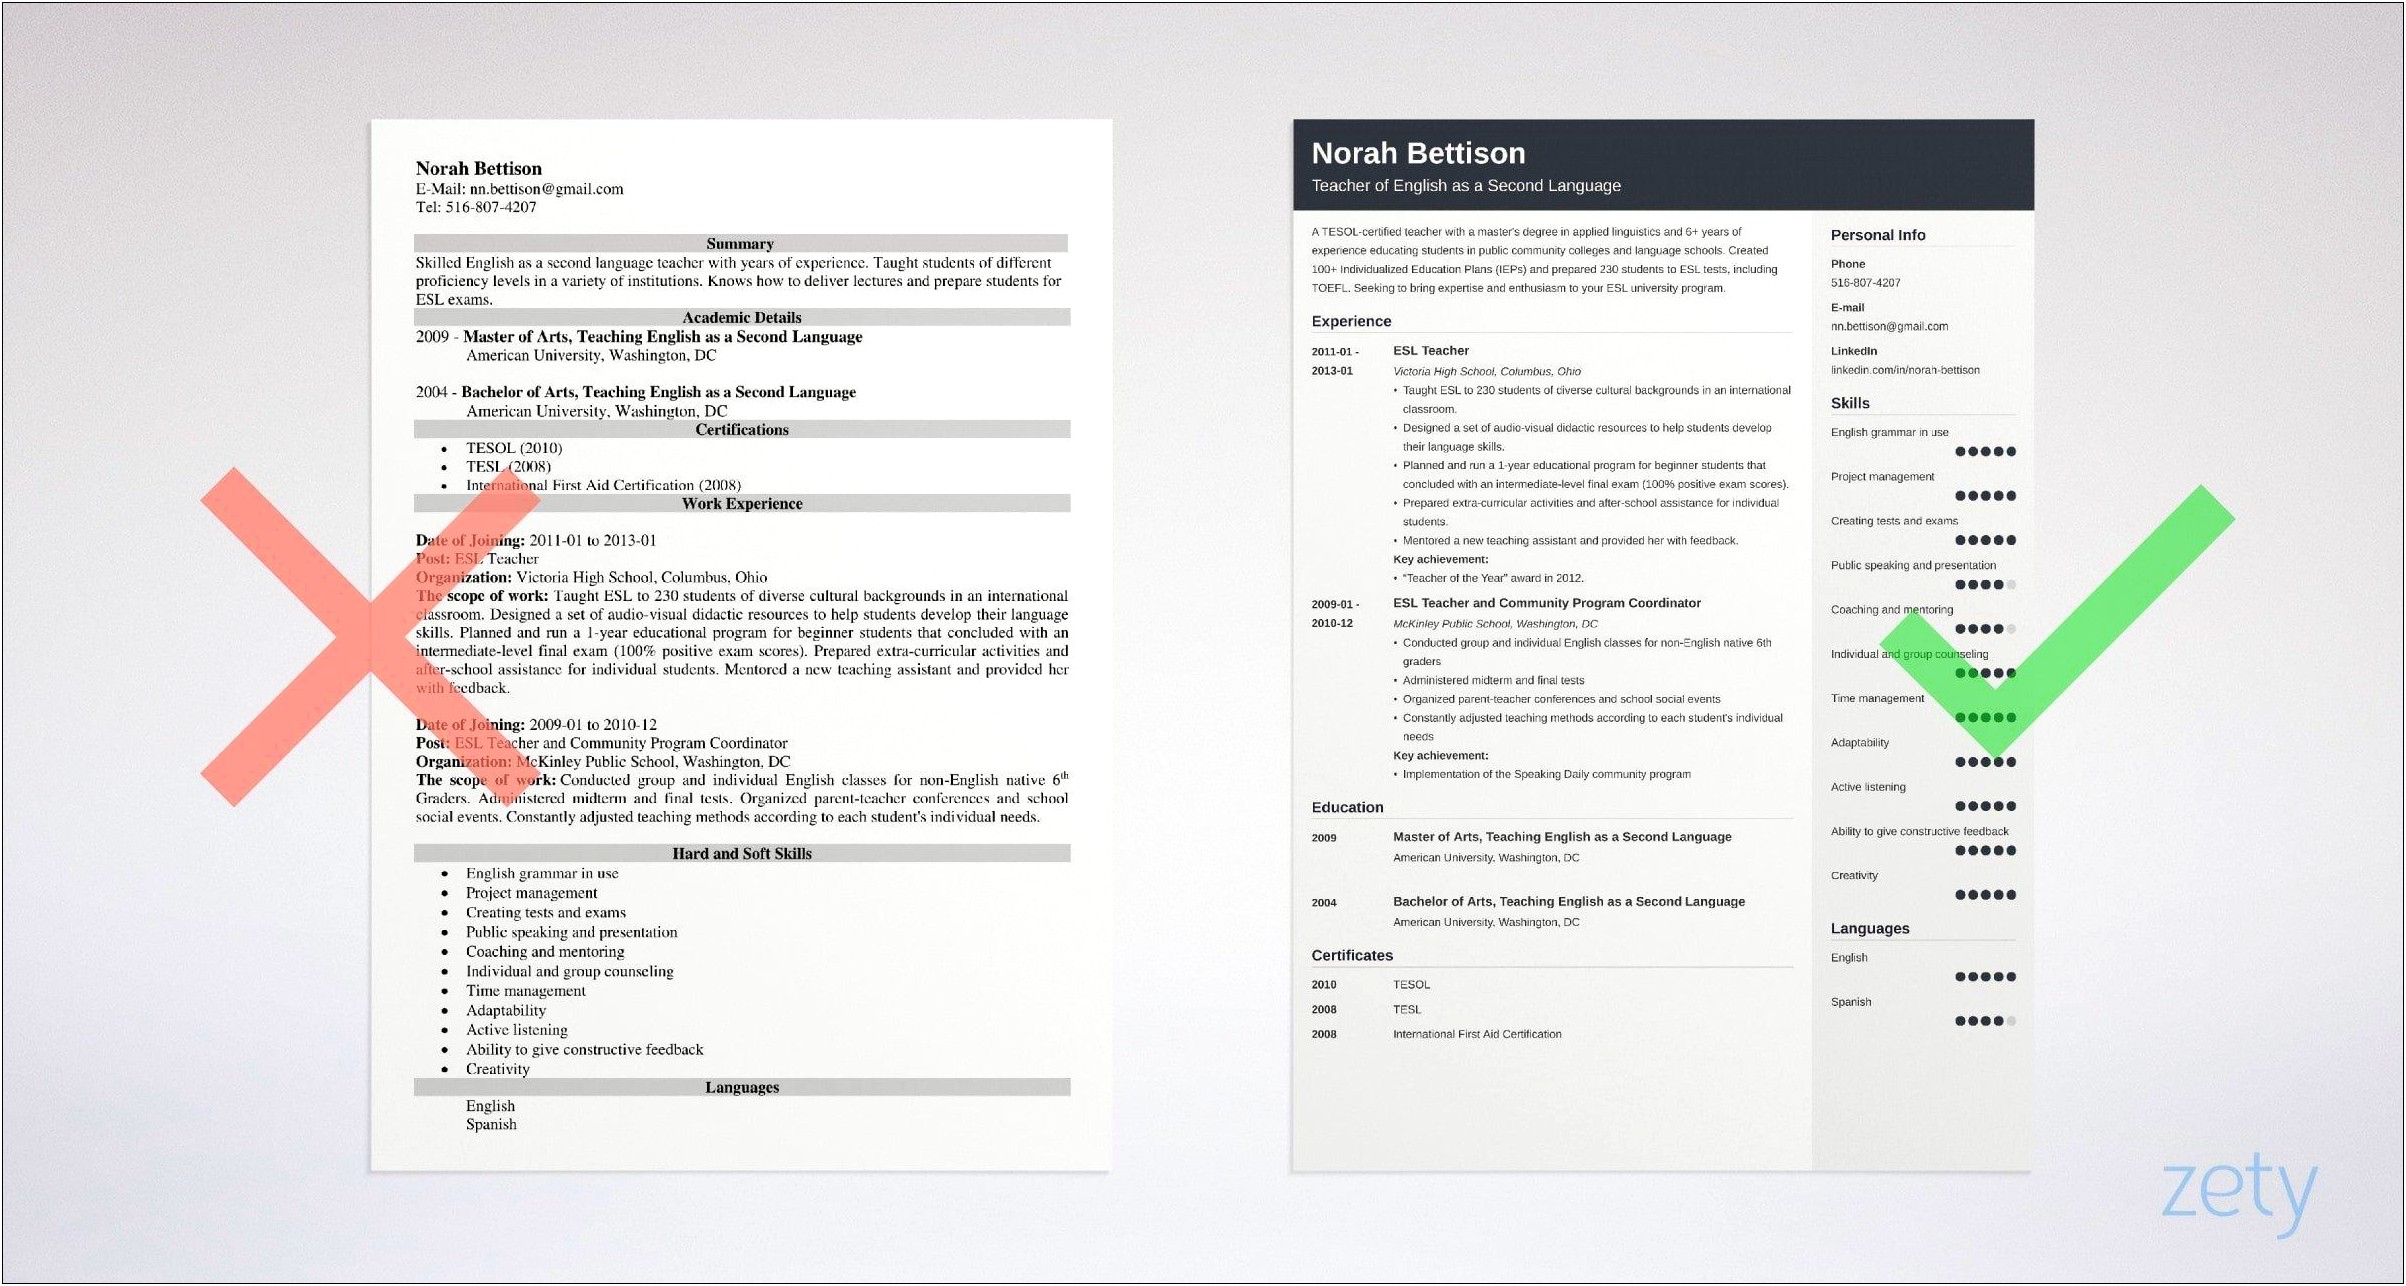 Examples Of Resumes For English Teachers